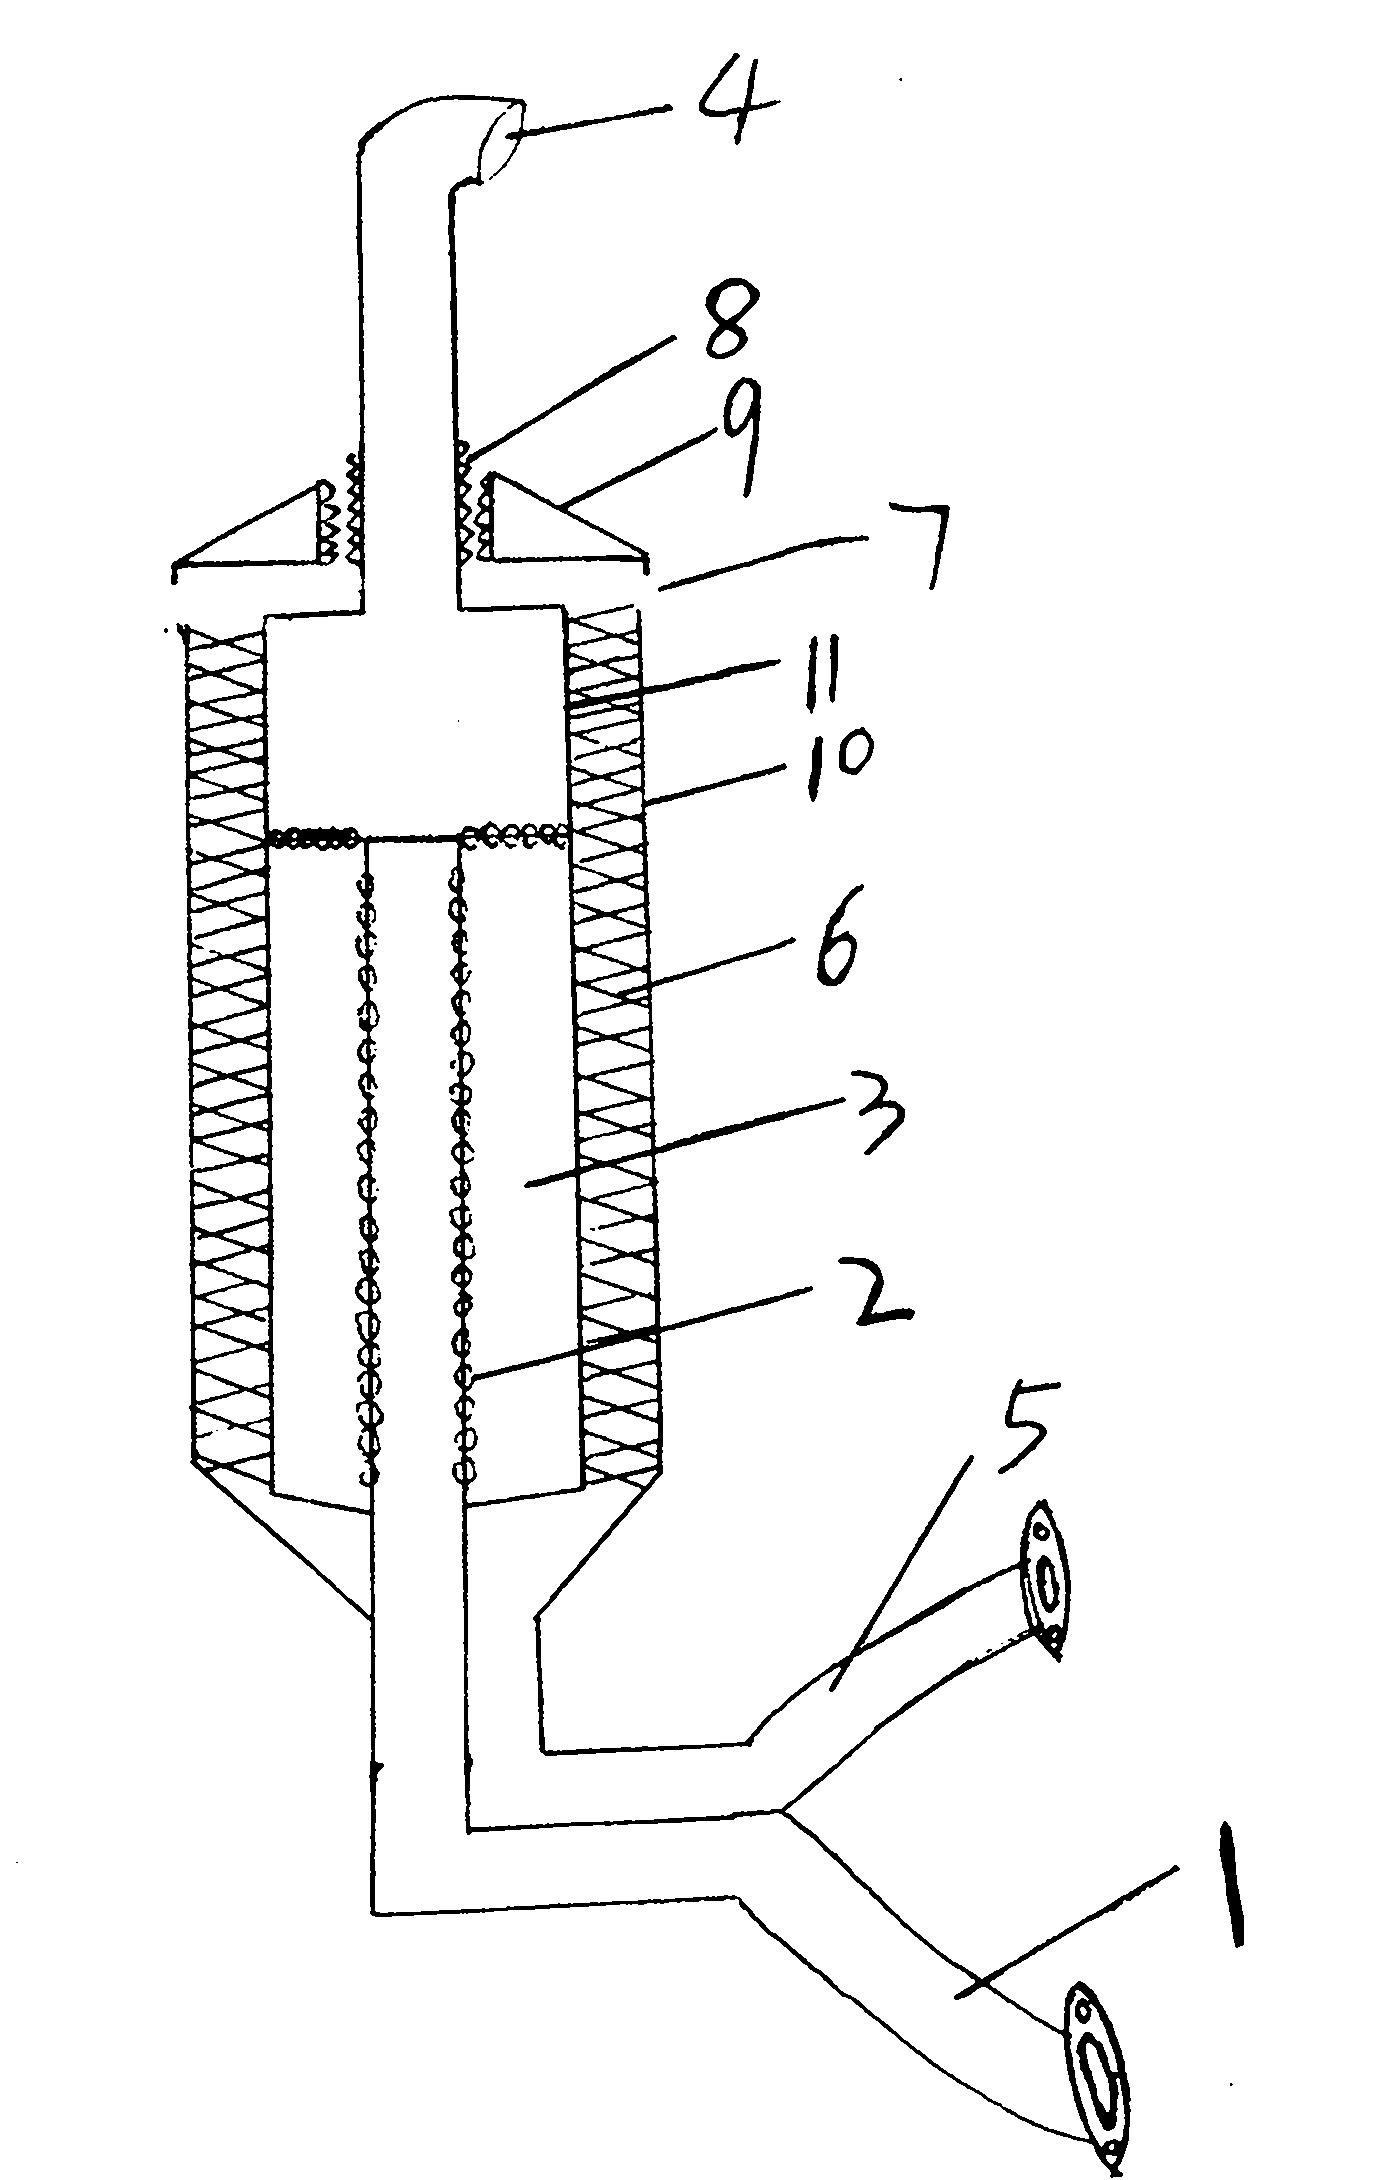 Air intake-exhaust integrated machine